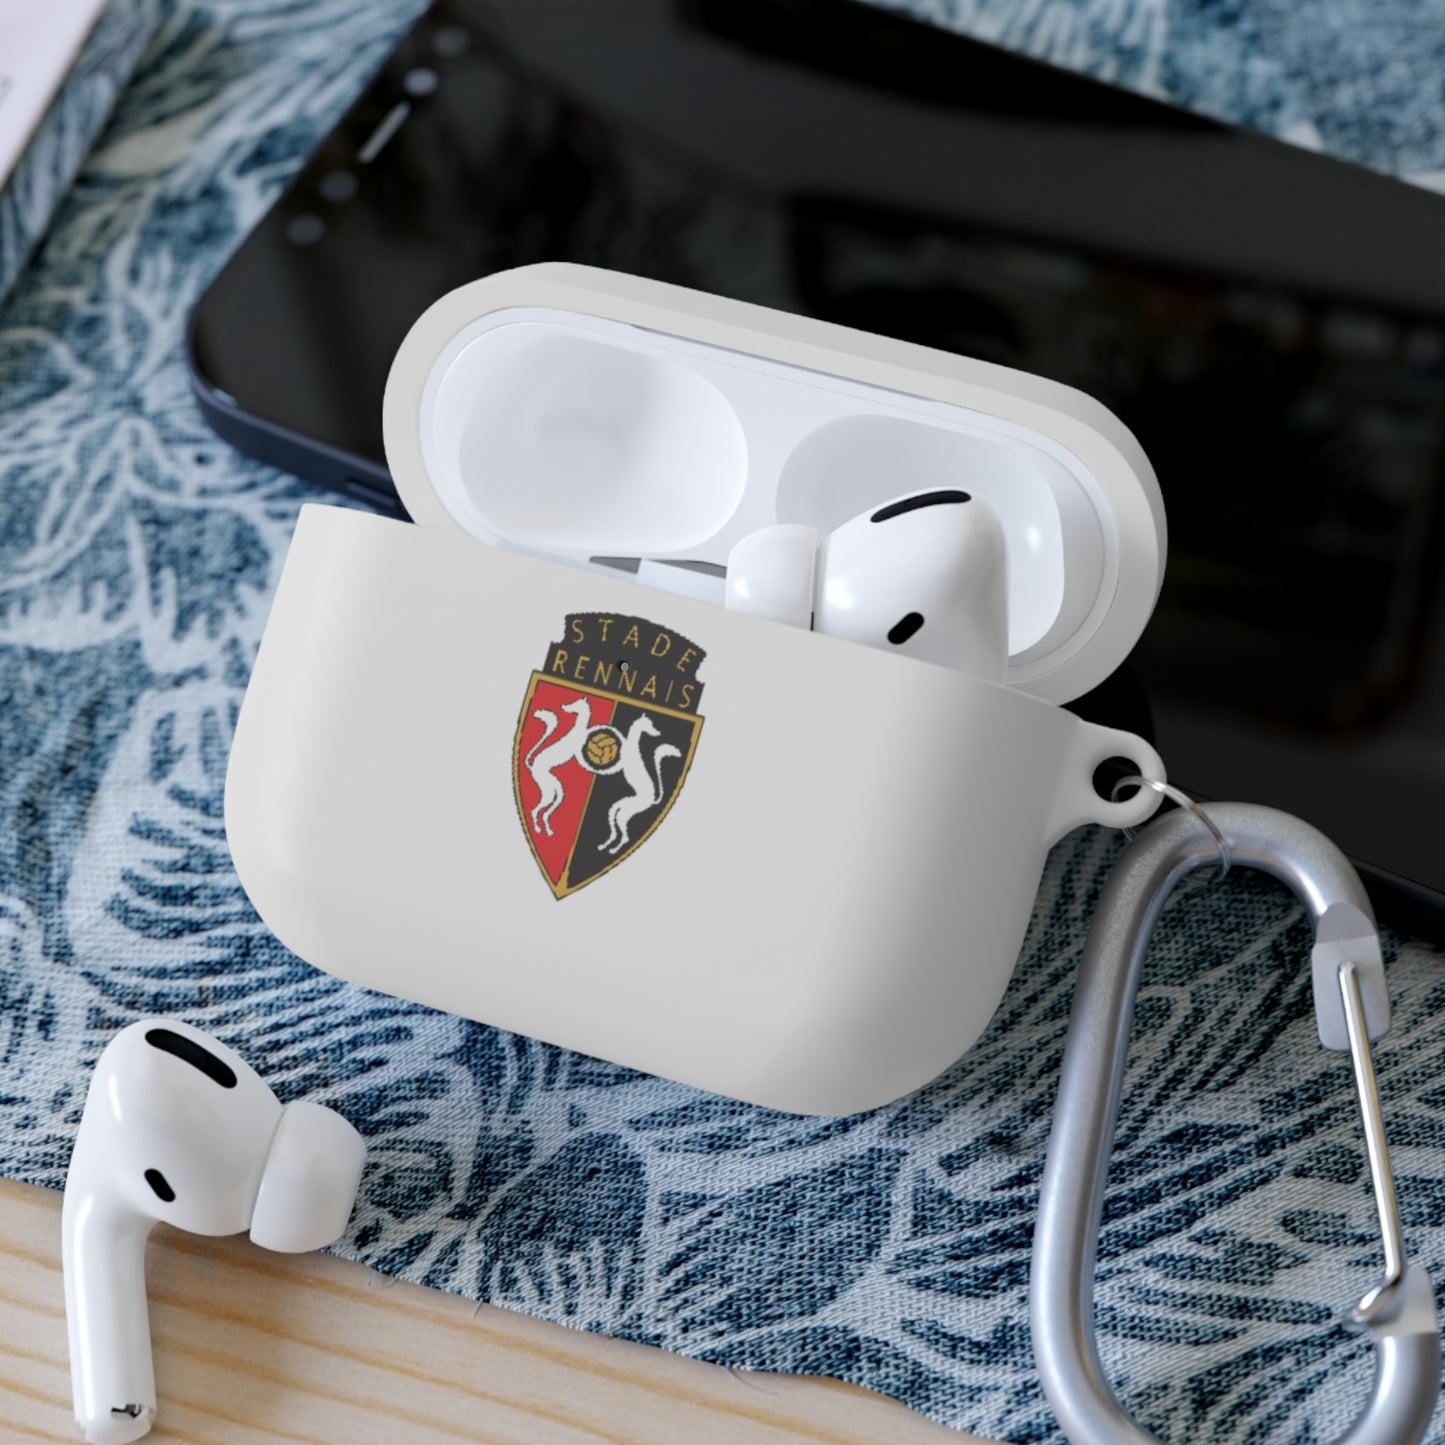 Stade Rennais (old logo) AirPods and AirPods Pro Case Cover